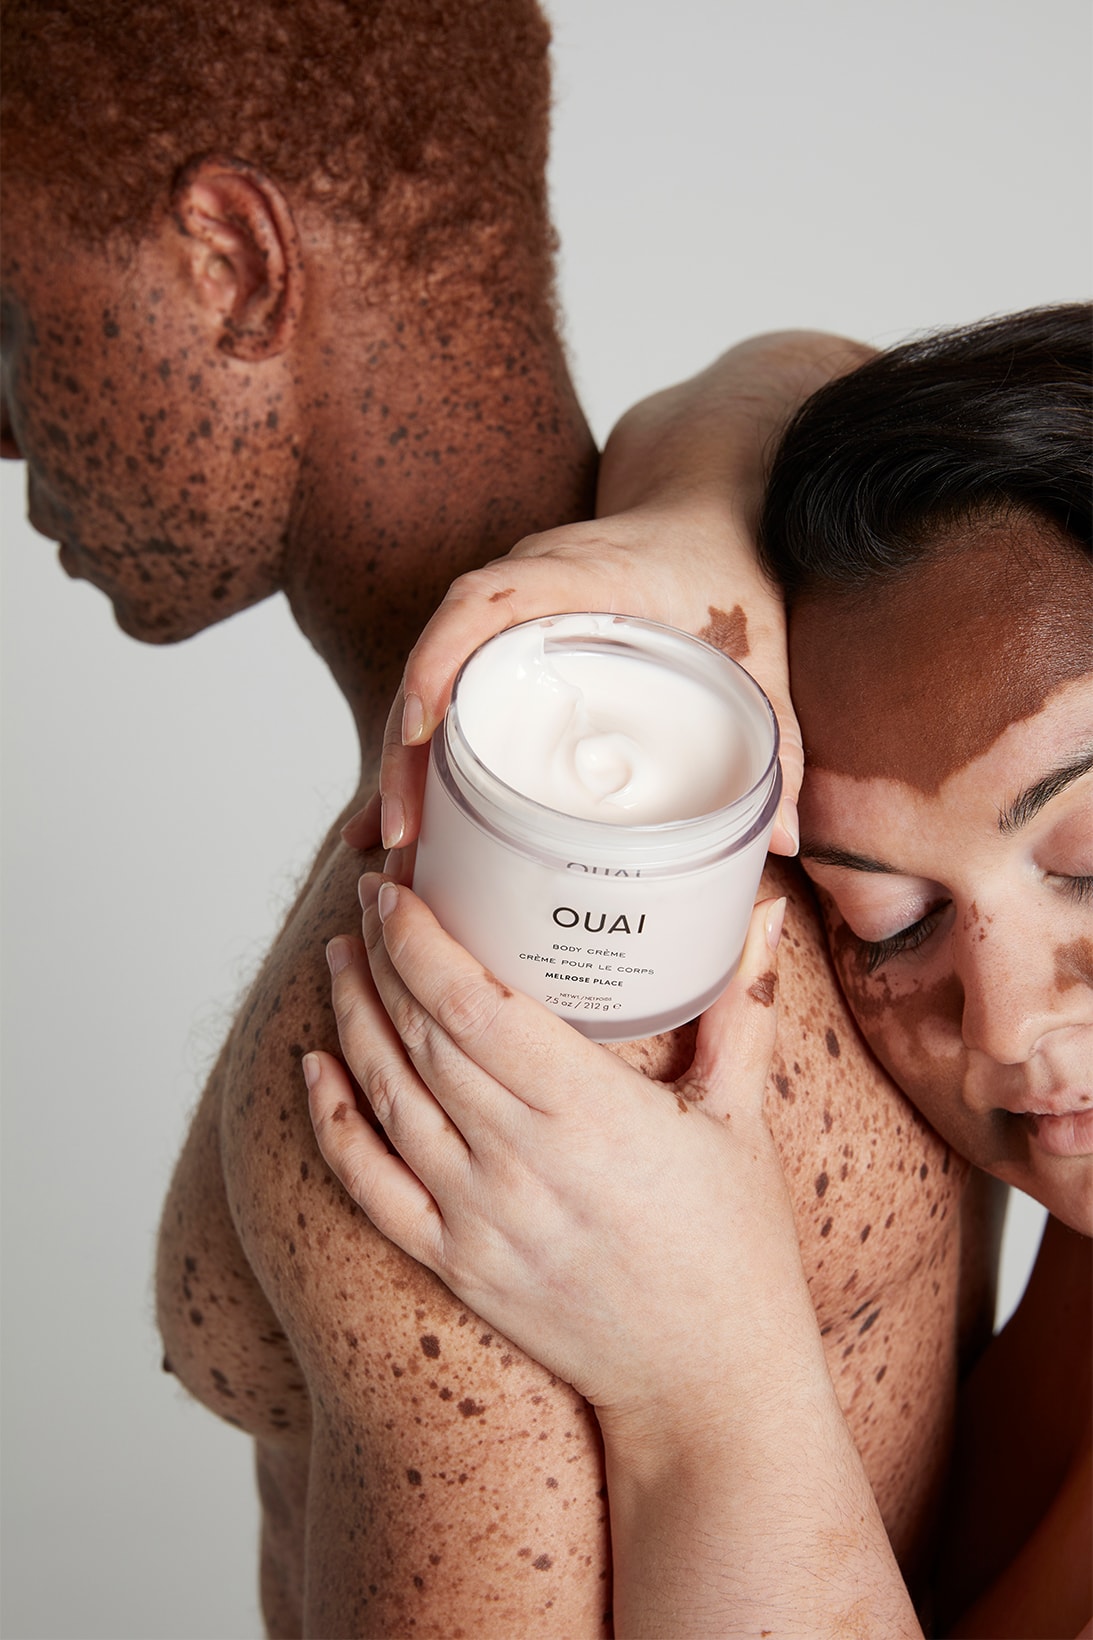 OUAI Melrose Place Cleanser Body Creme Skincare Haircare 